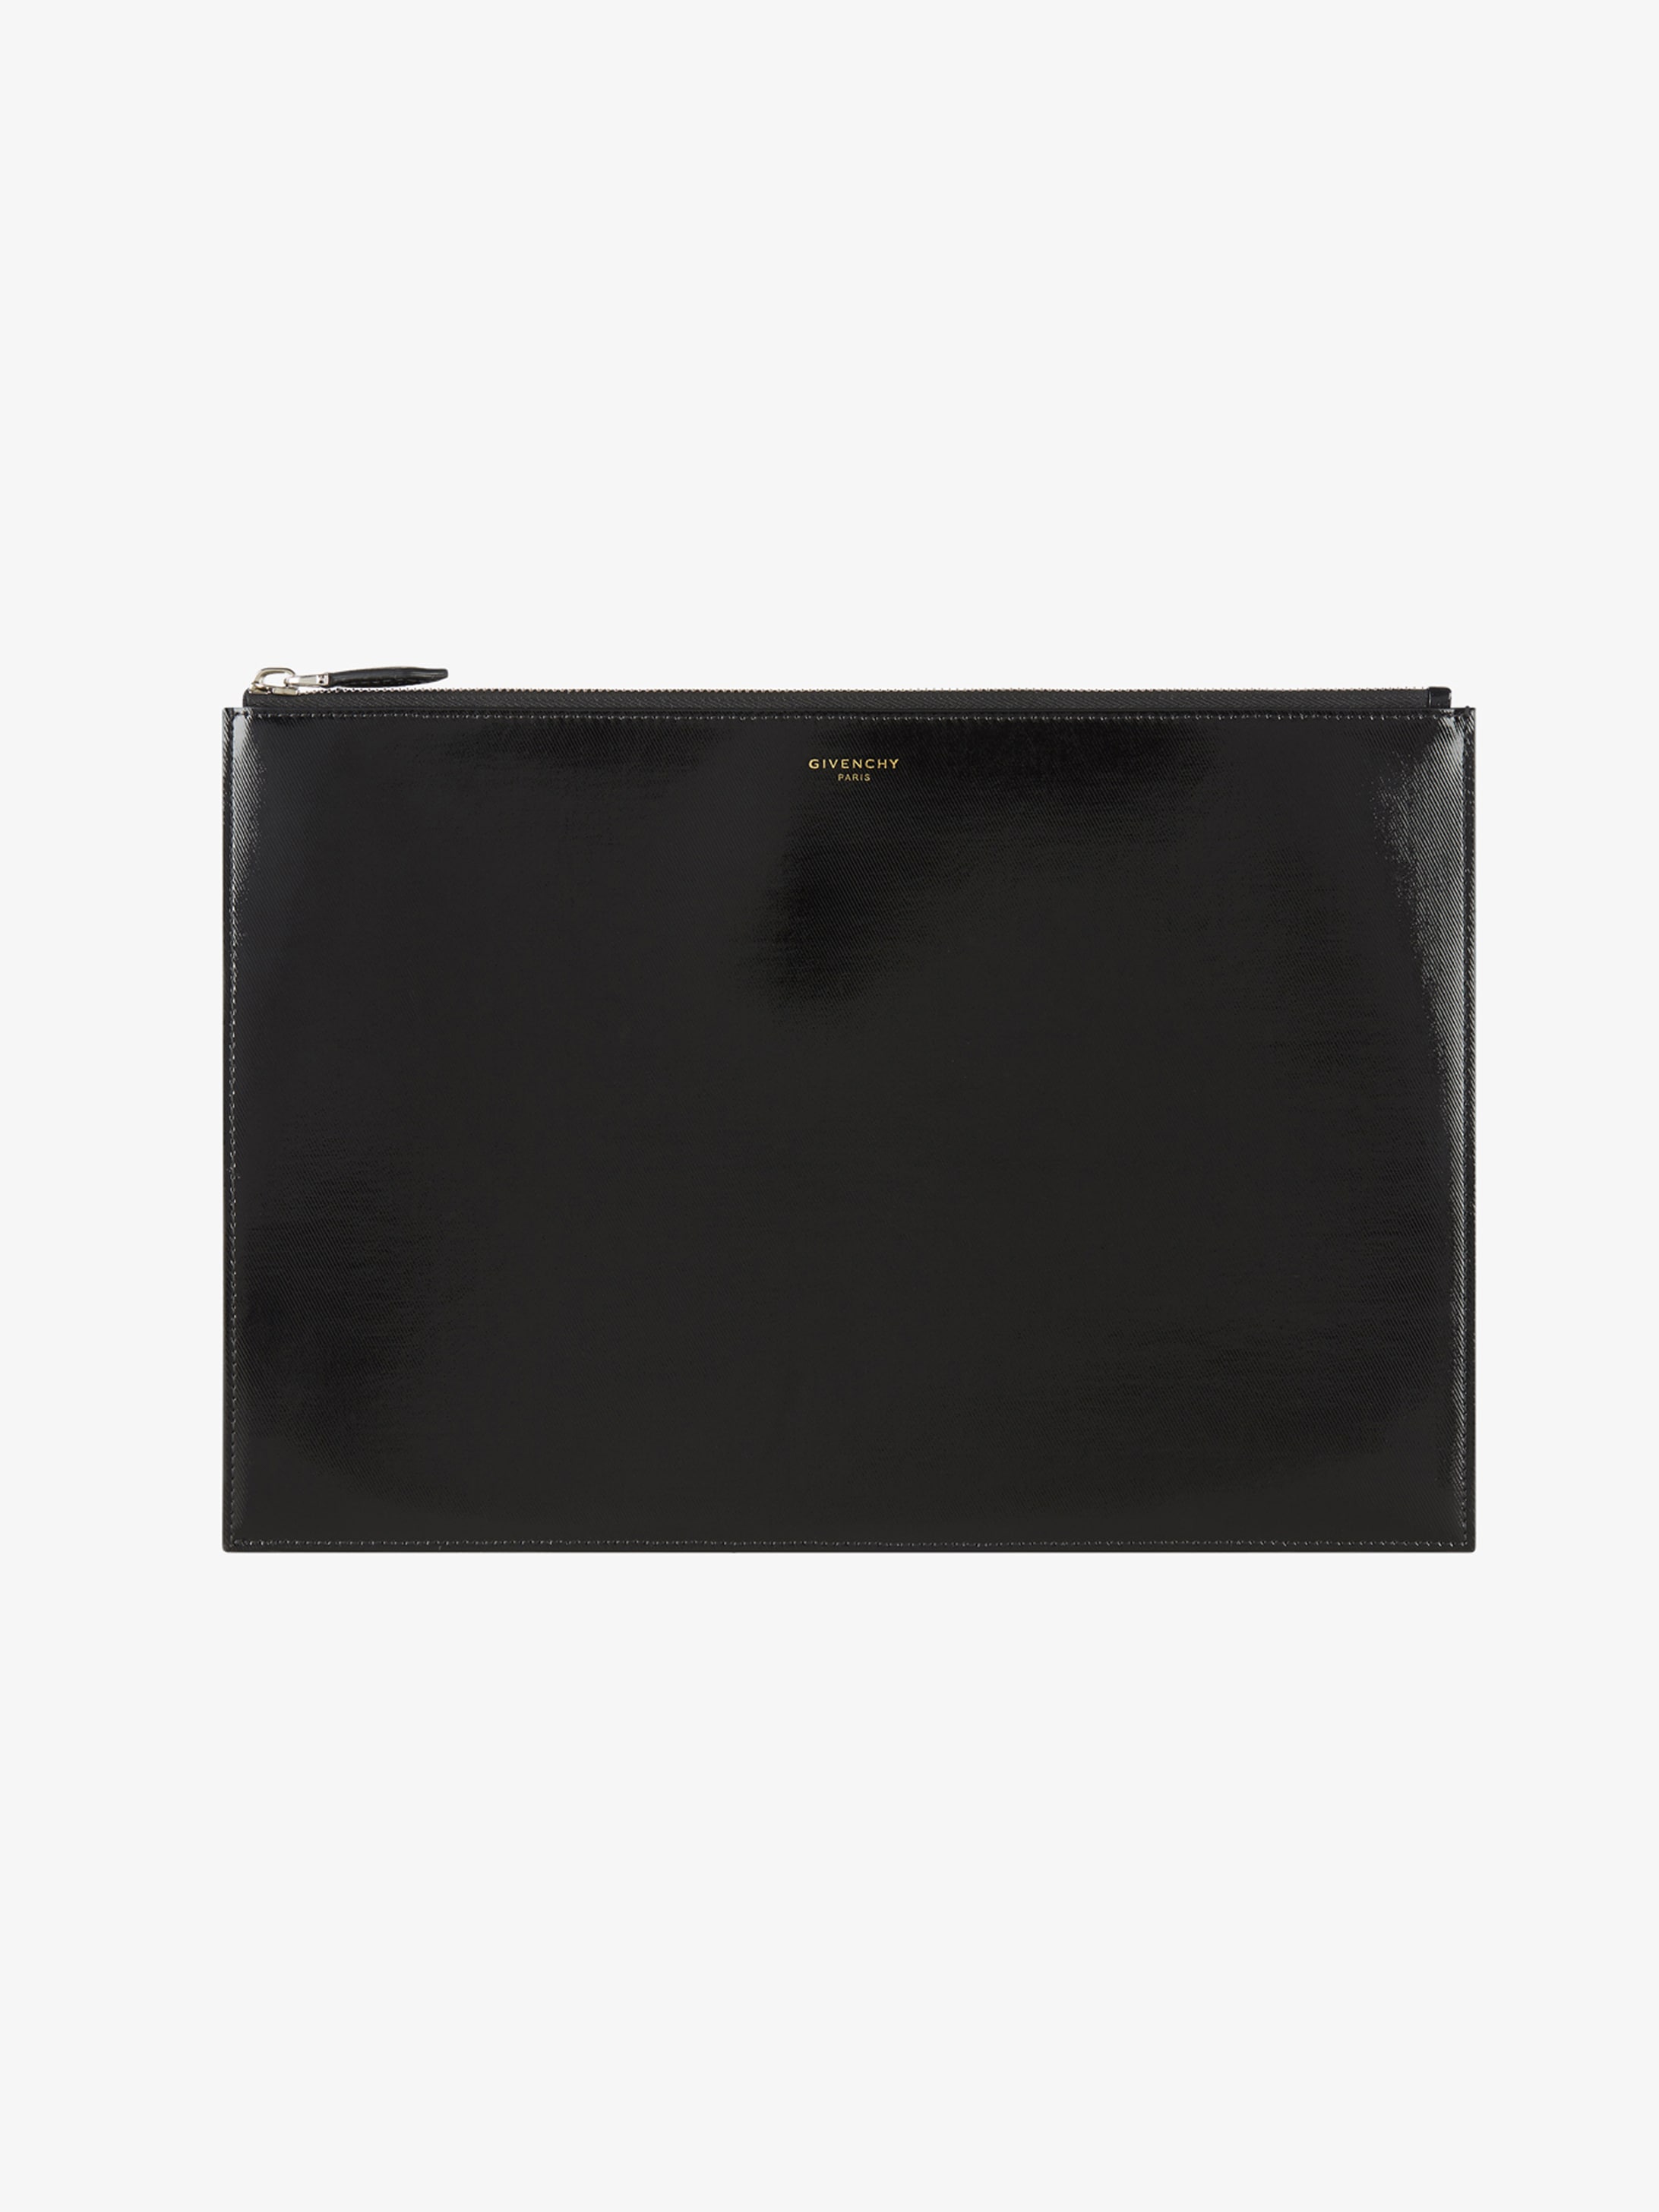 givenchy large pouch